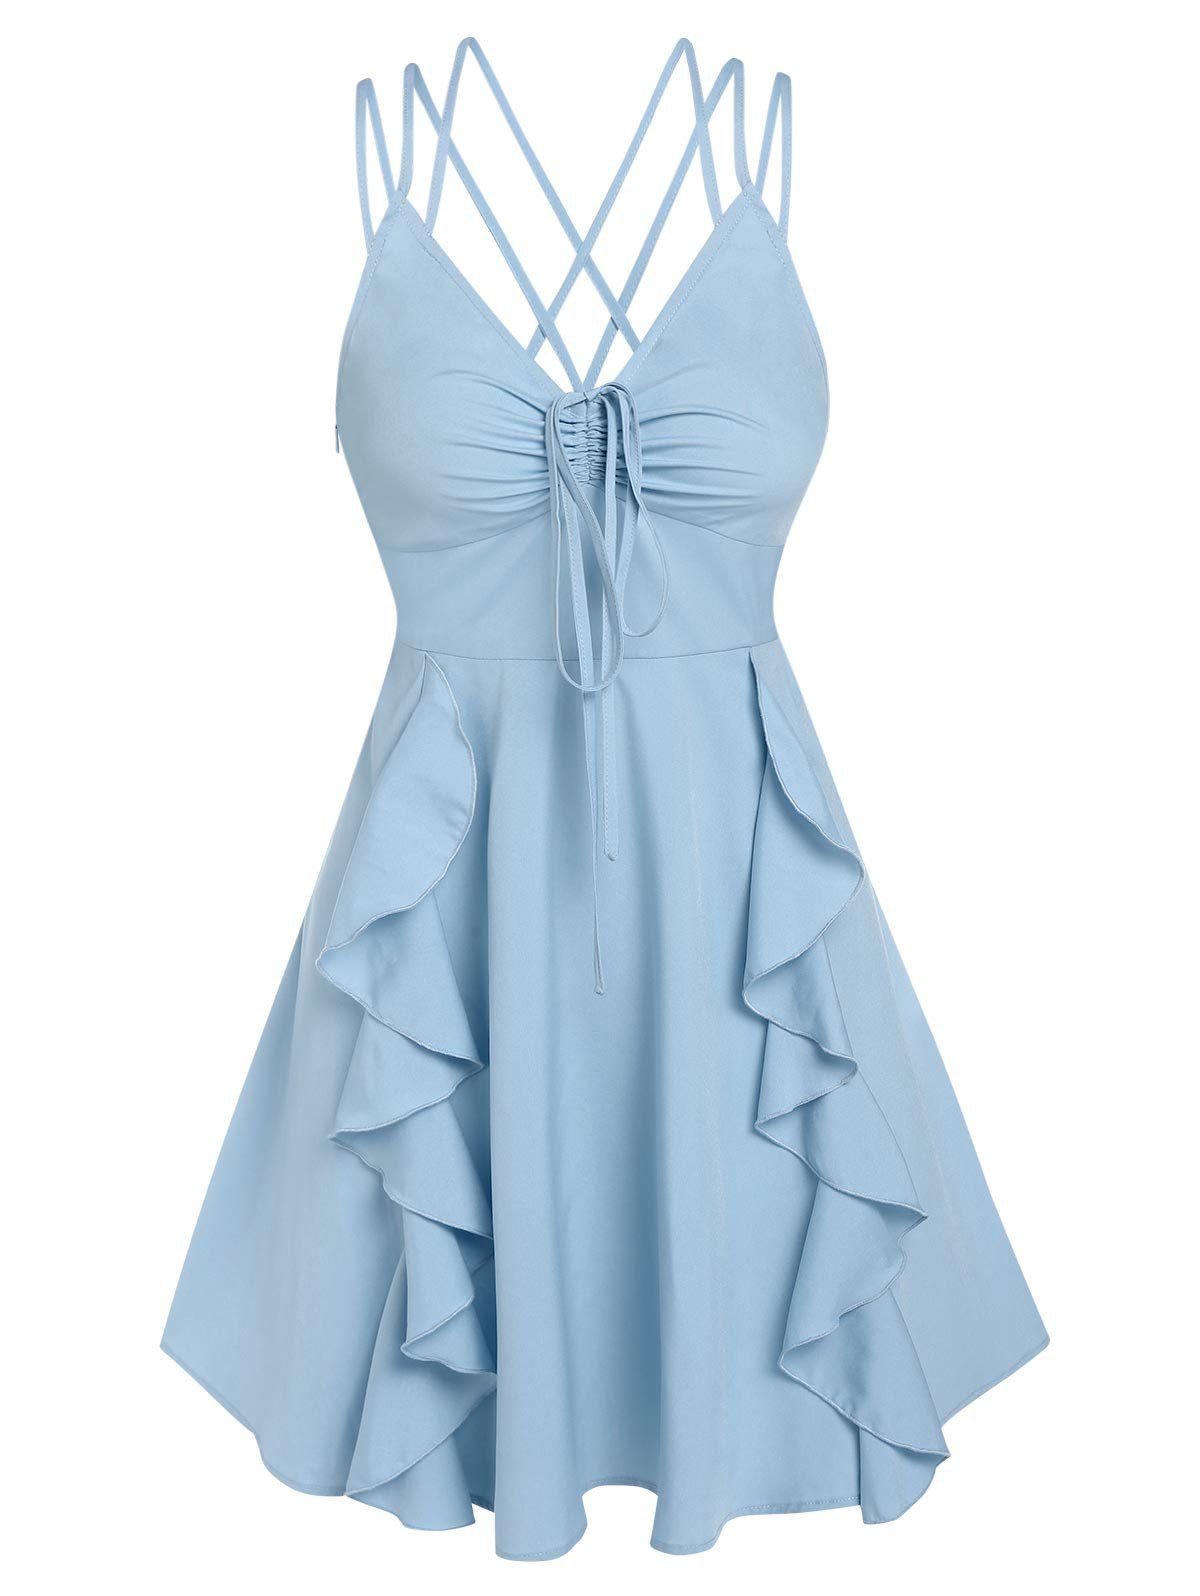 Strappy Cinched Ruffle Detail Dress